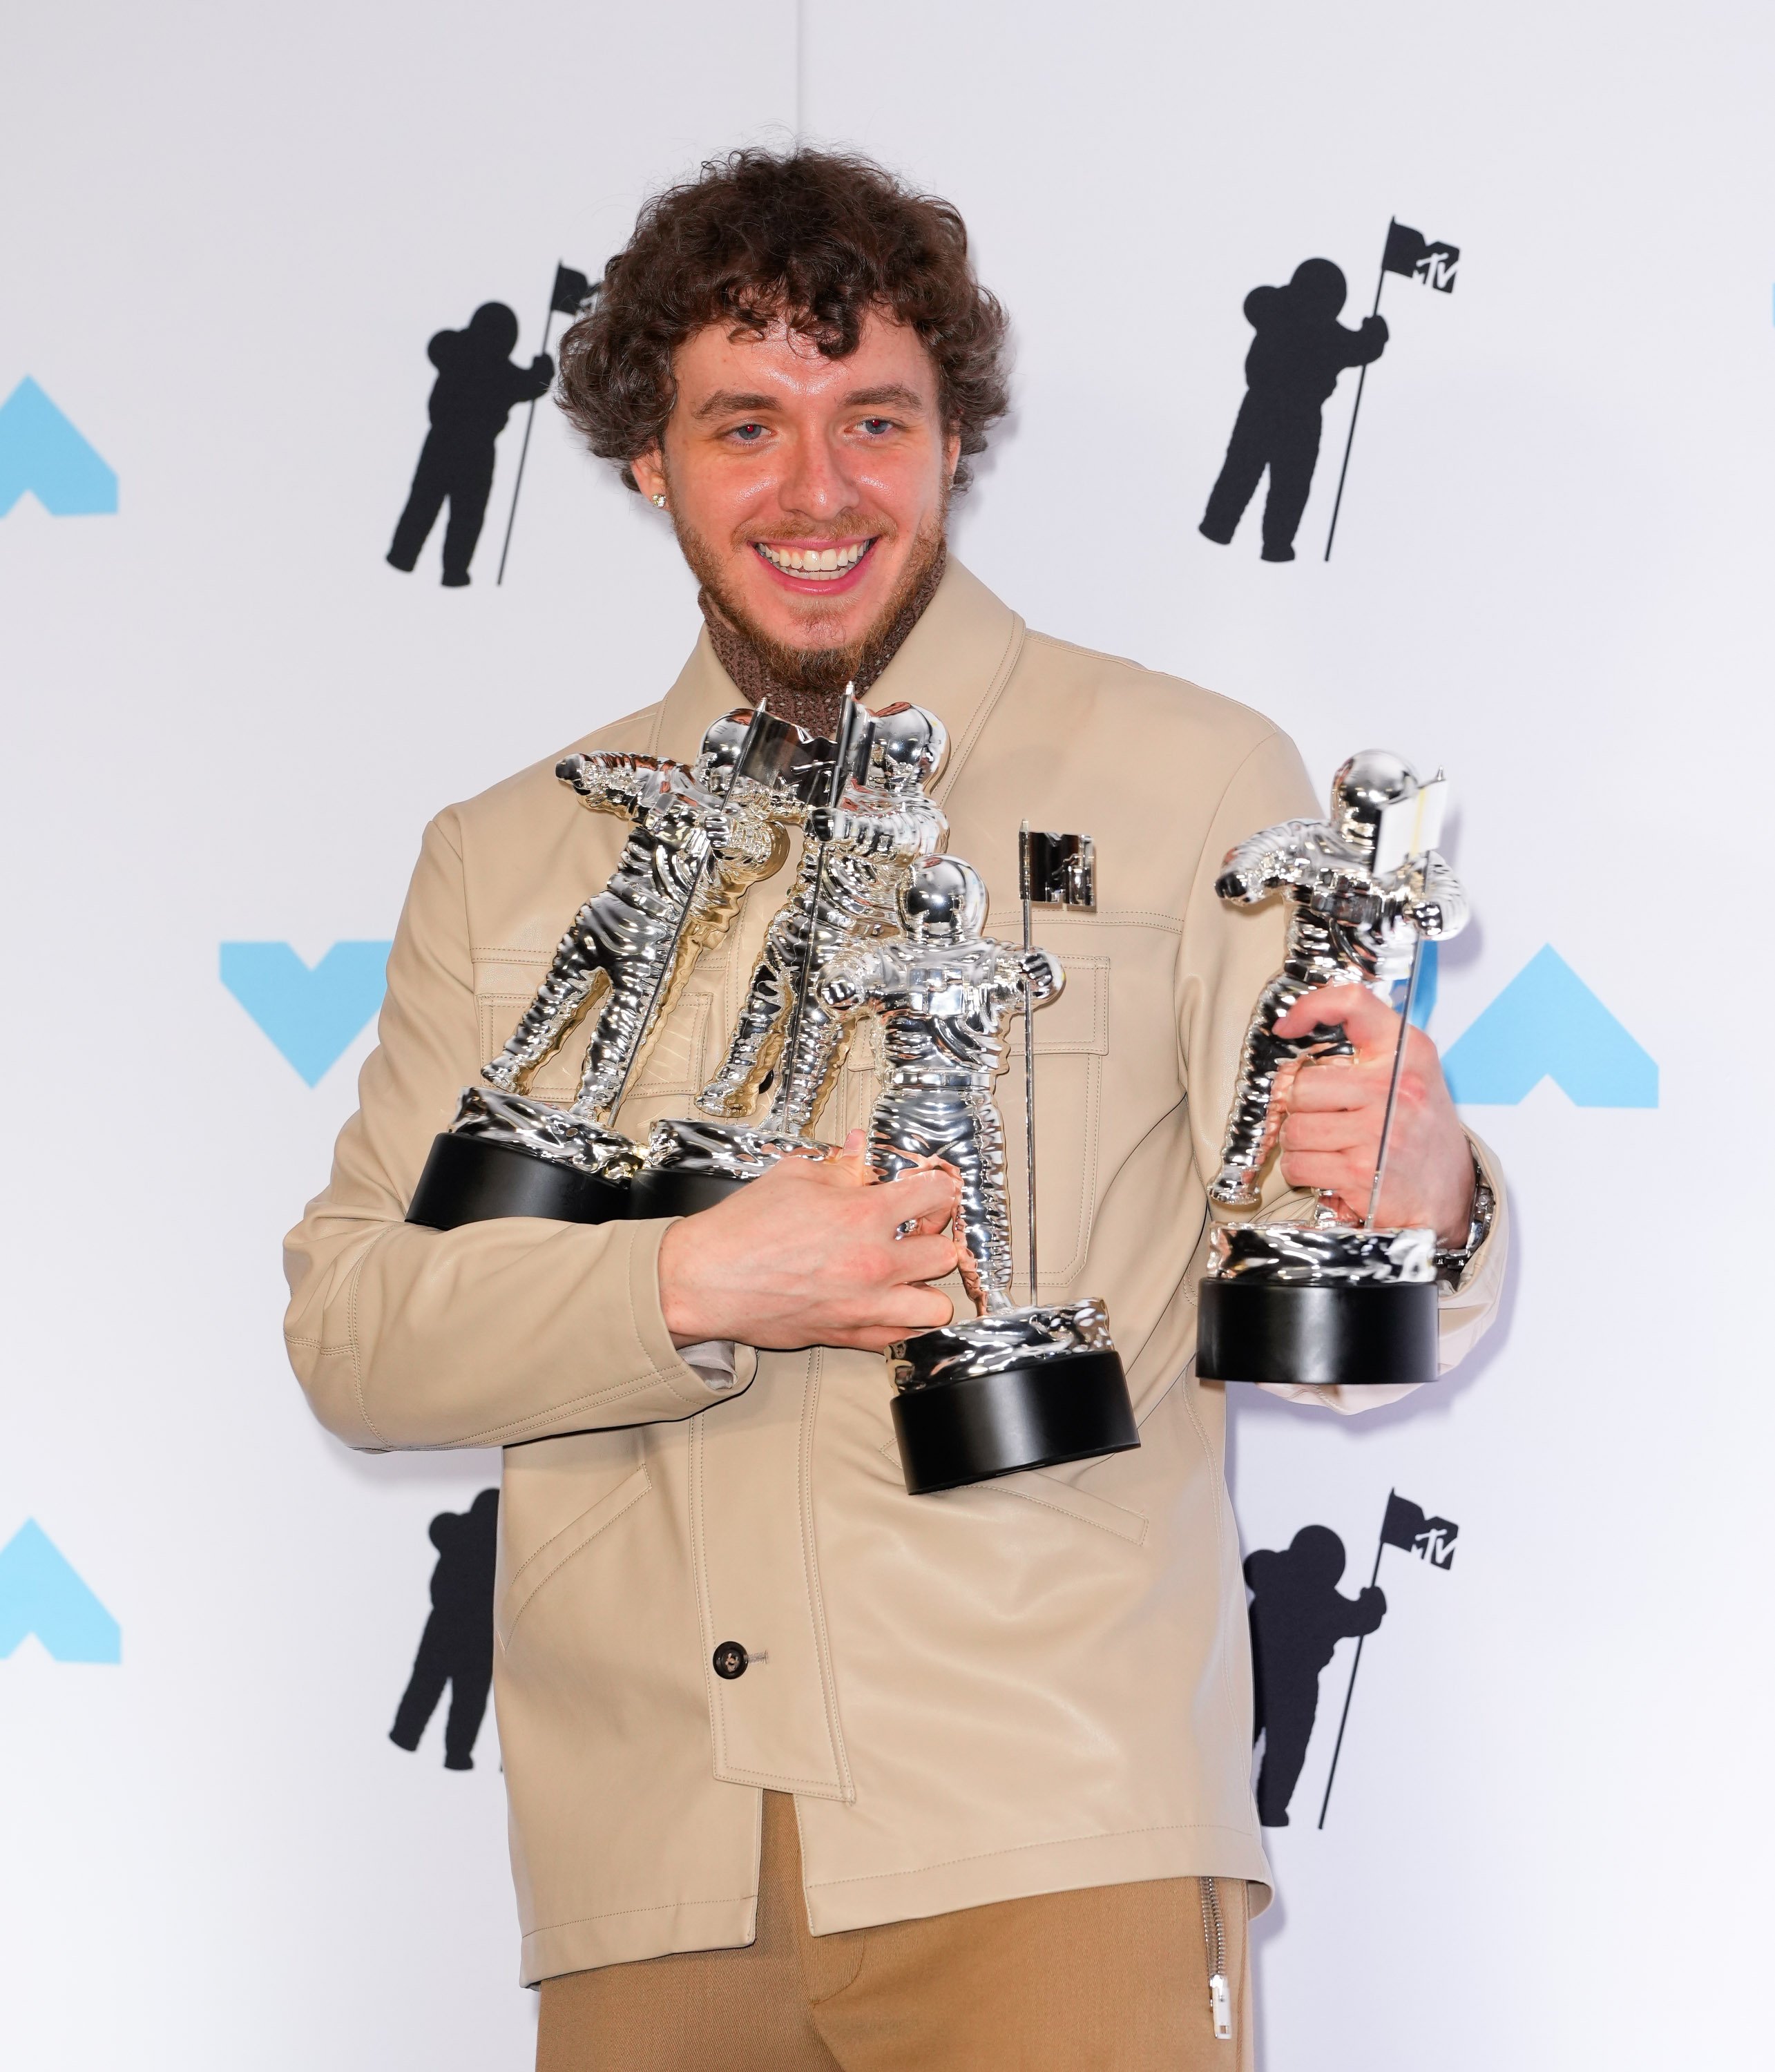 Jack Harlow arrives at the 2022 MTV VMAs on August 28, 2022 | Source: Getty Images